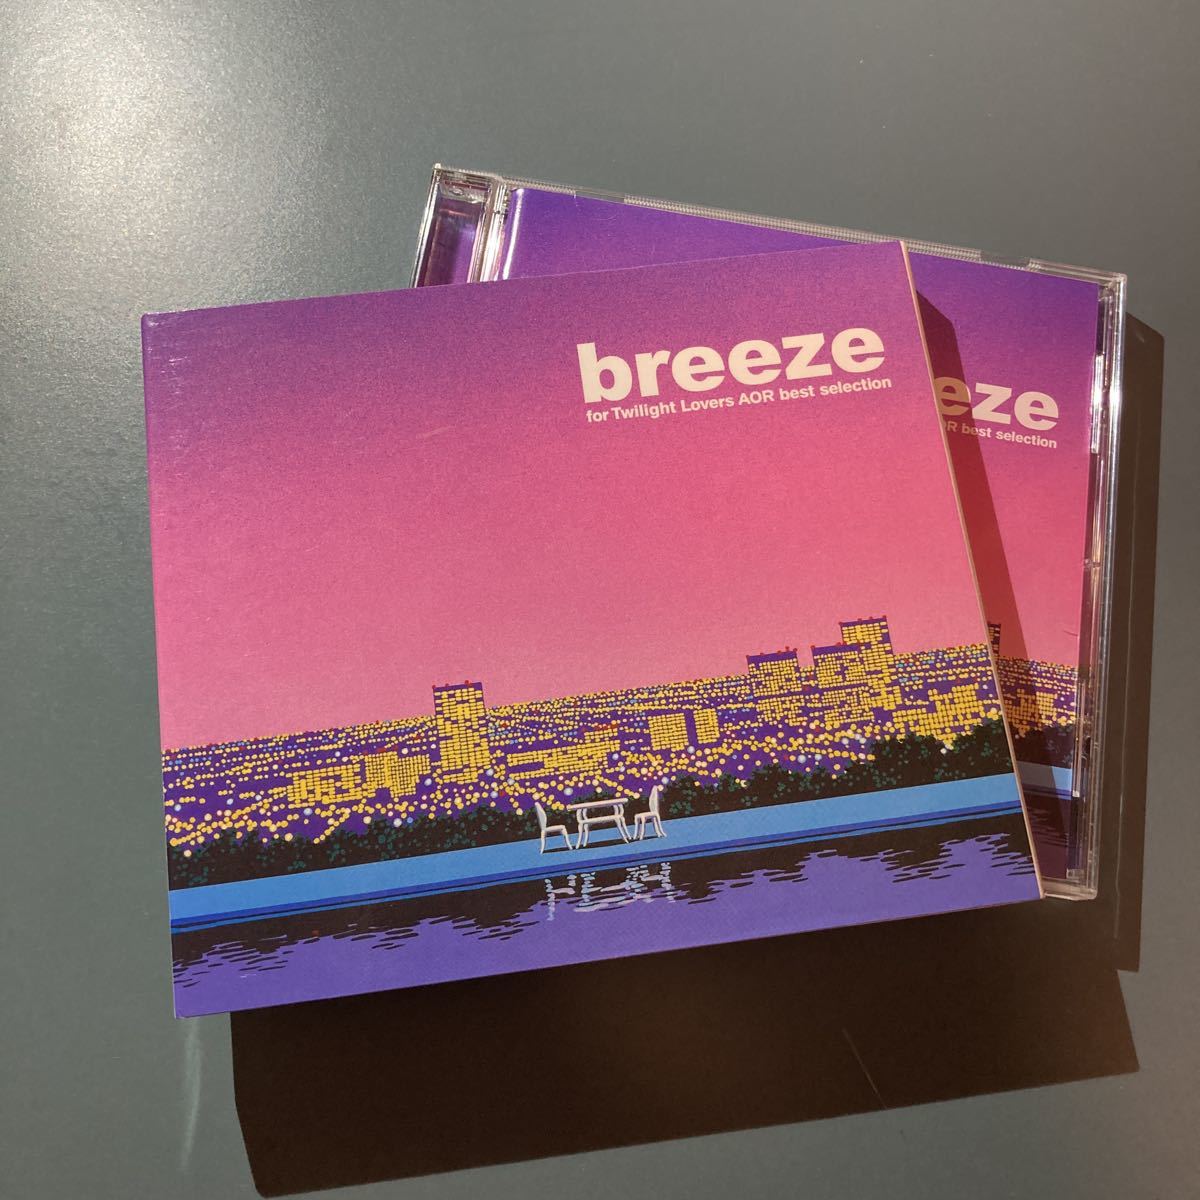 CD★breeze~for twilight lovers AOR best selection 永井博ジャケ_画像1